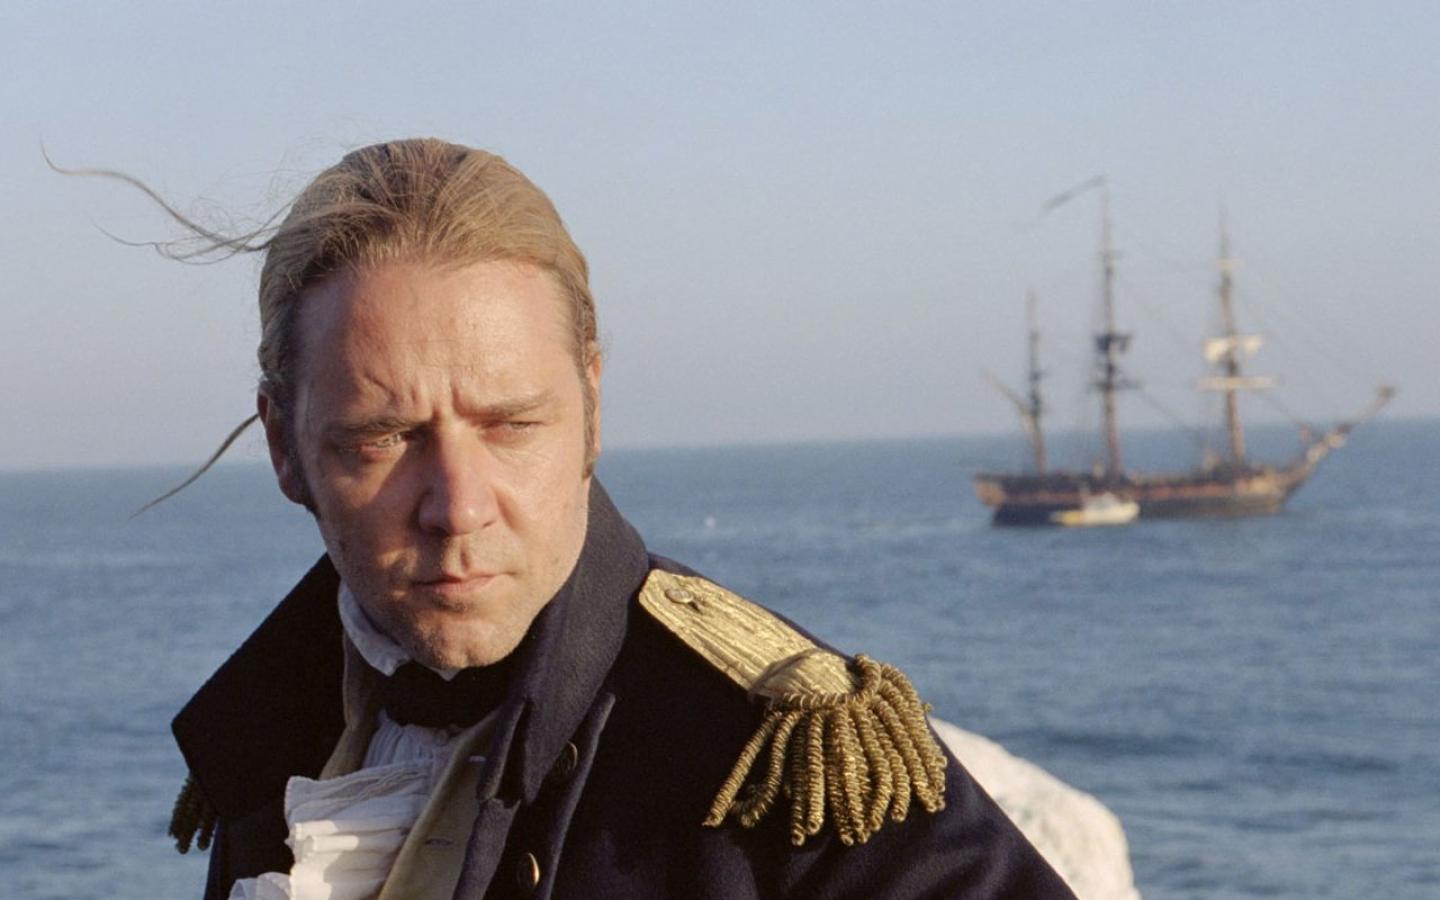 Master And Commander: The Far Side Of The World Wallpaper #2 1440 x 900 